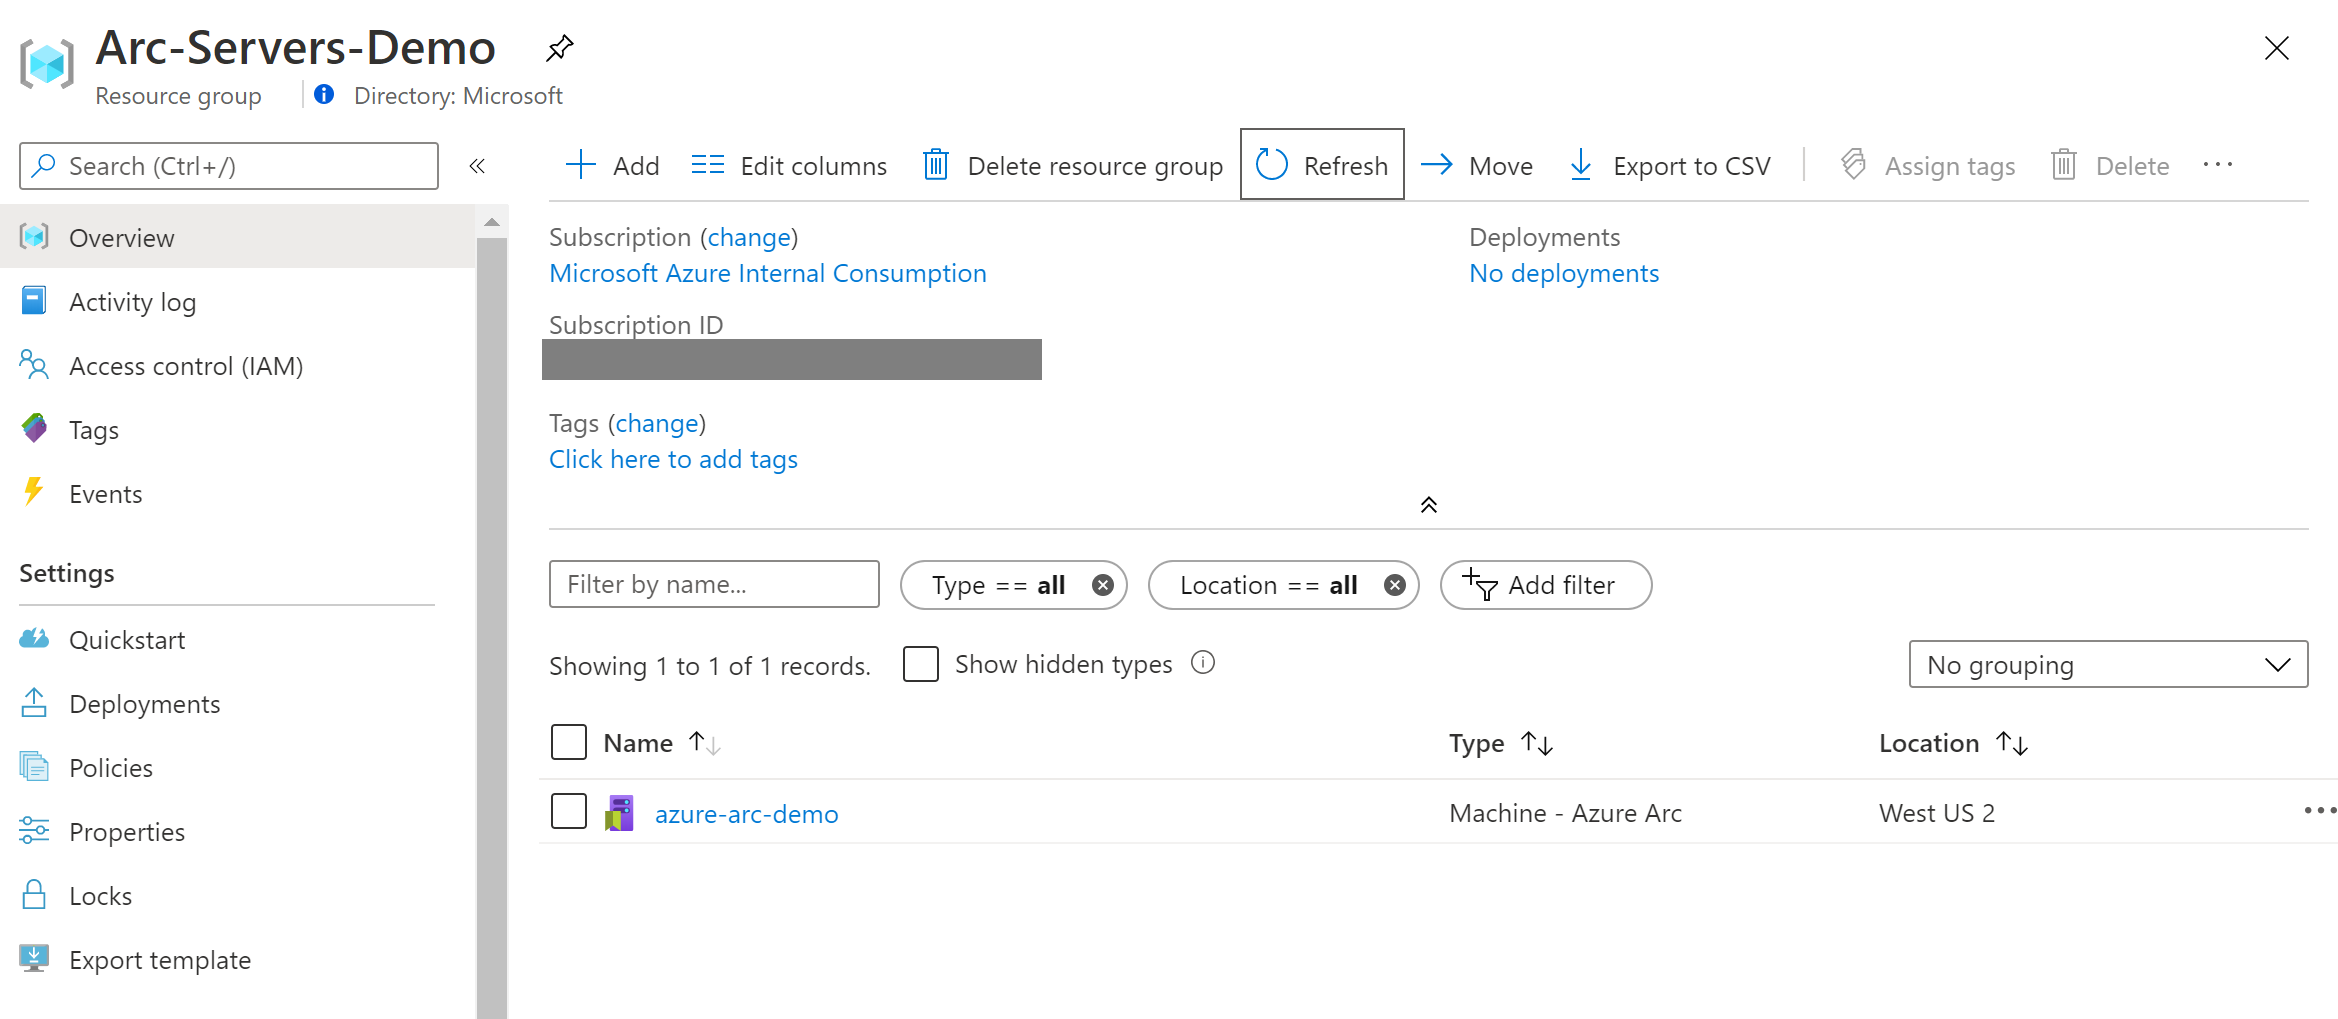 A screenshot showing an Azure Arc-enabled server in the Azure portal.